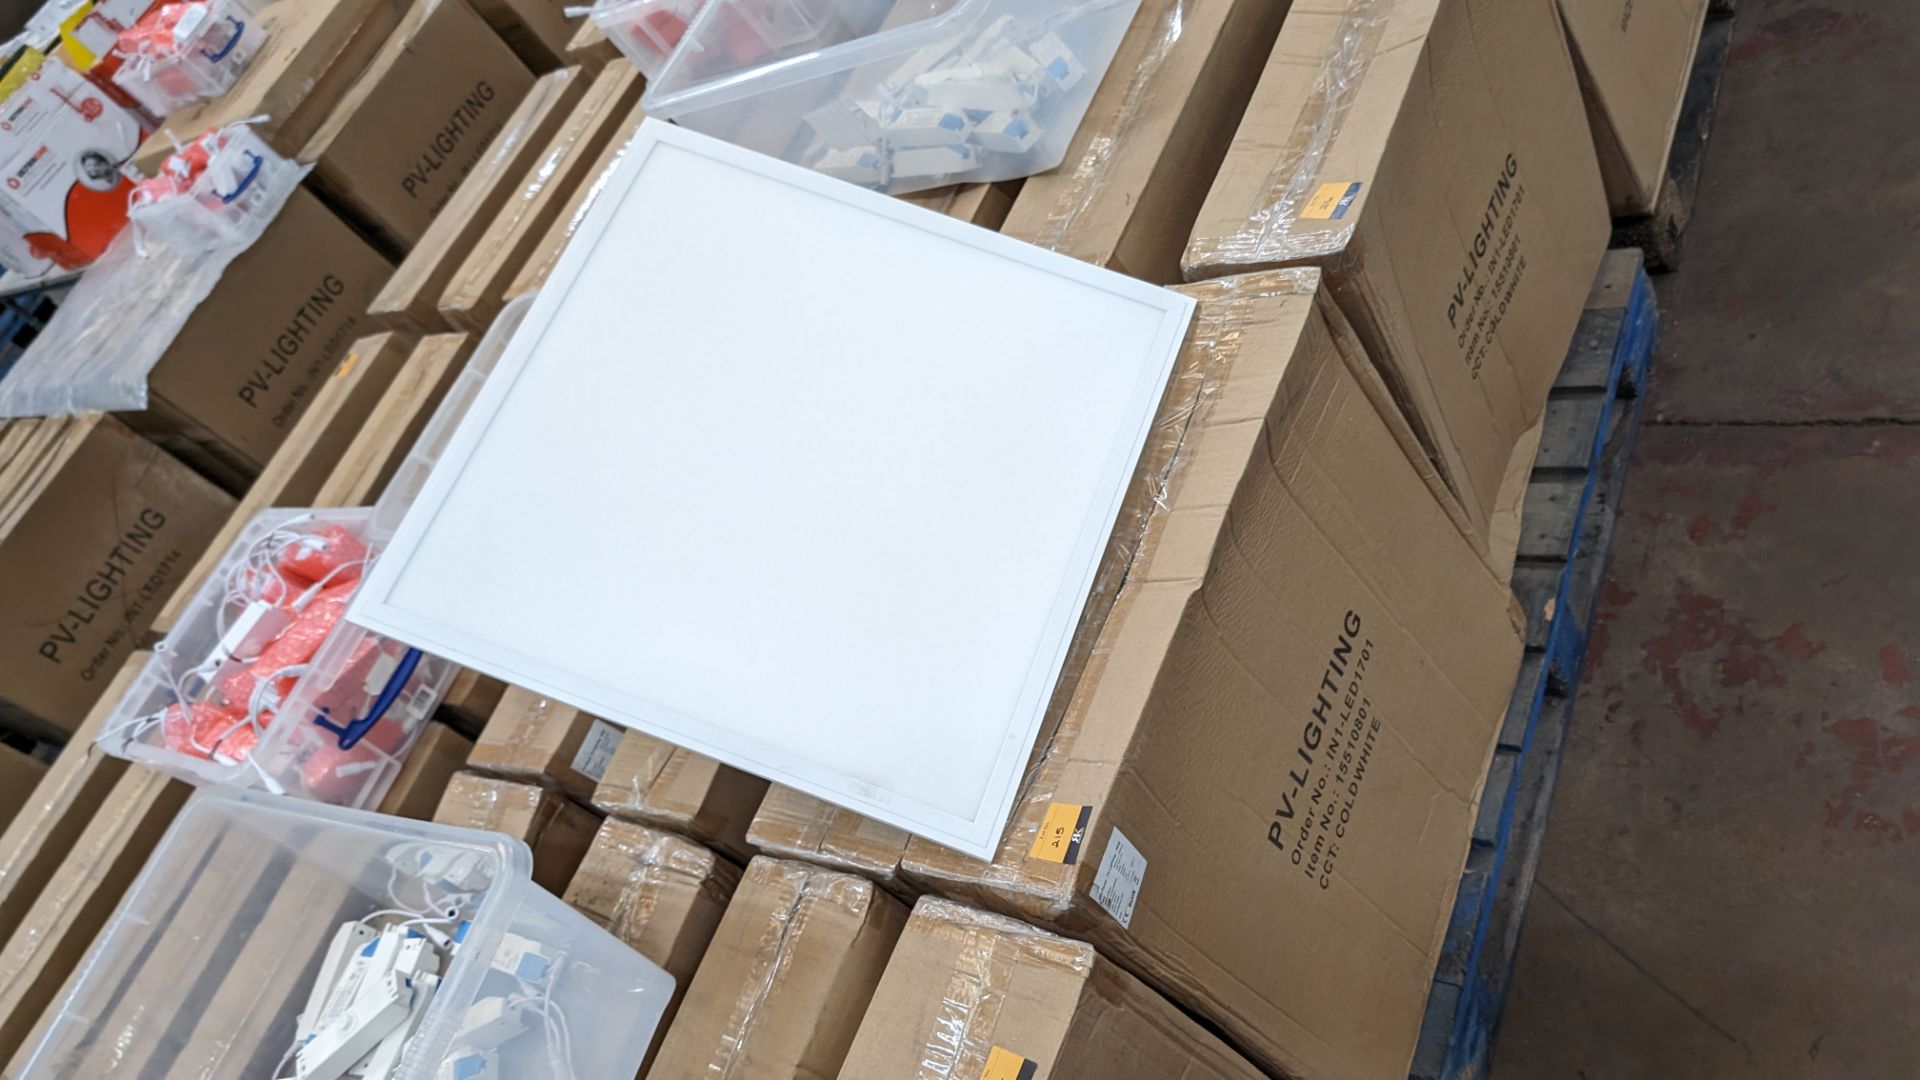 16 off 600mm x 600mm 36w 6000k 4320 lumens cold white LED lighting panels. 36w drivers. This lot c - Image 3 of 16